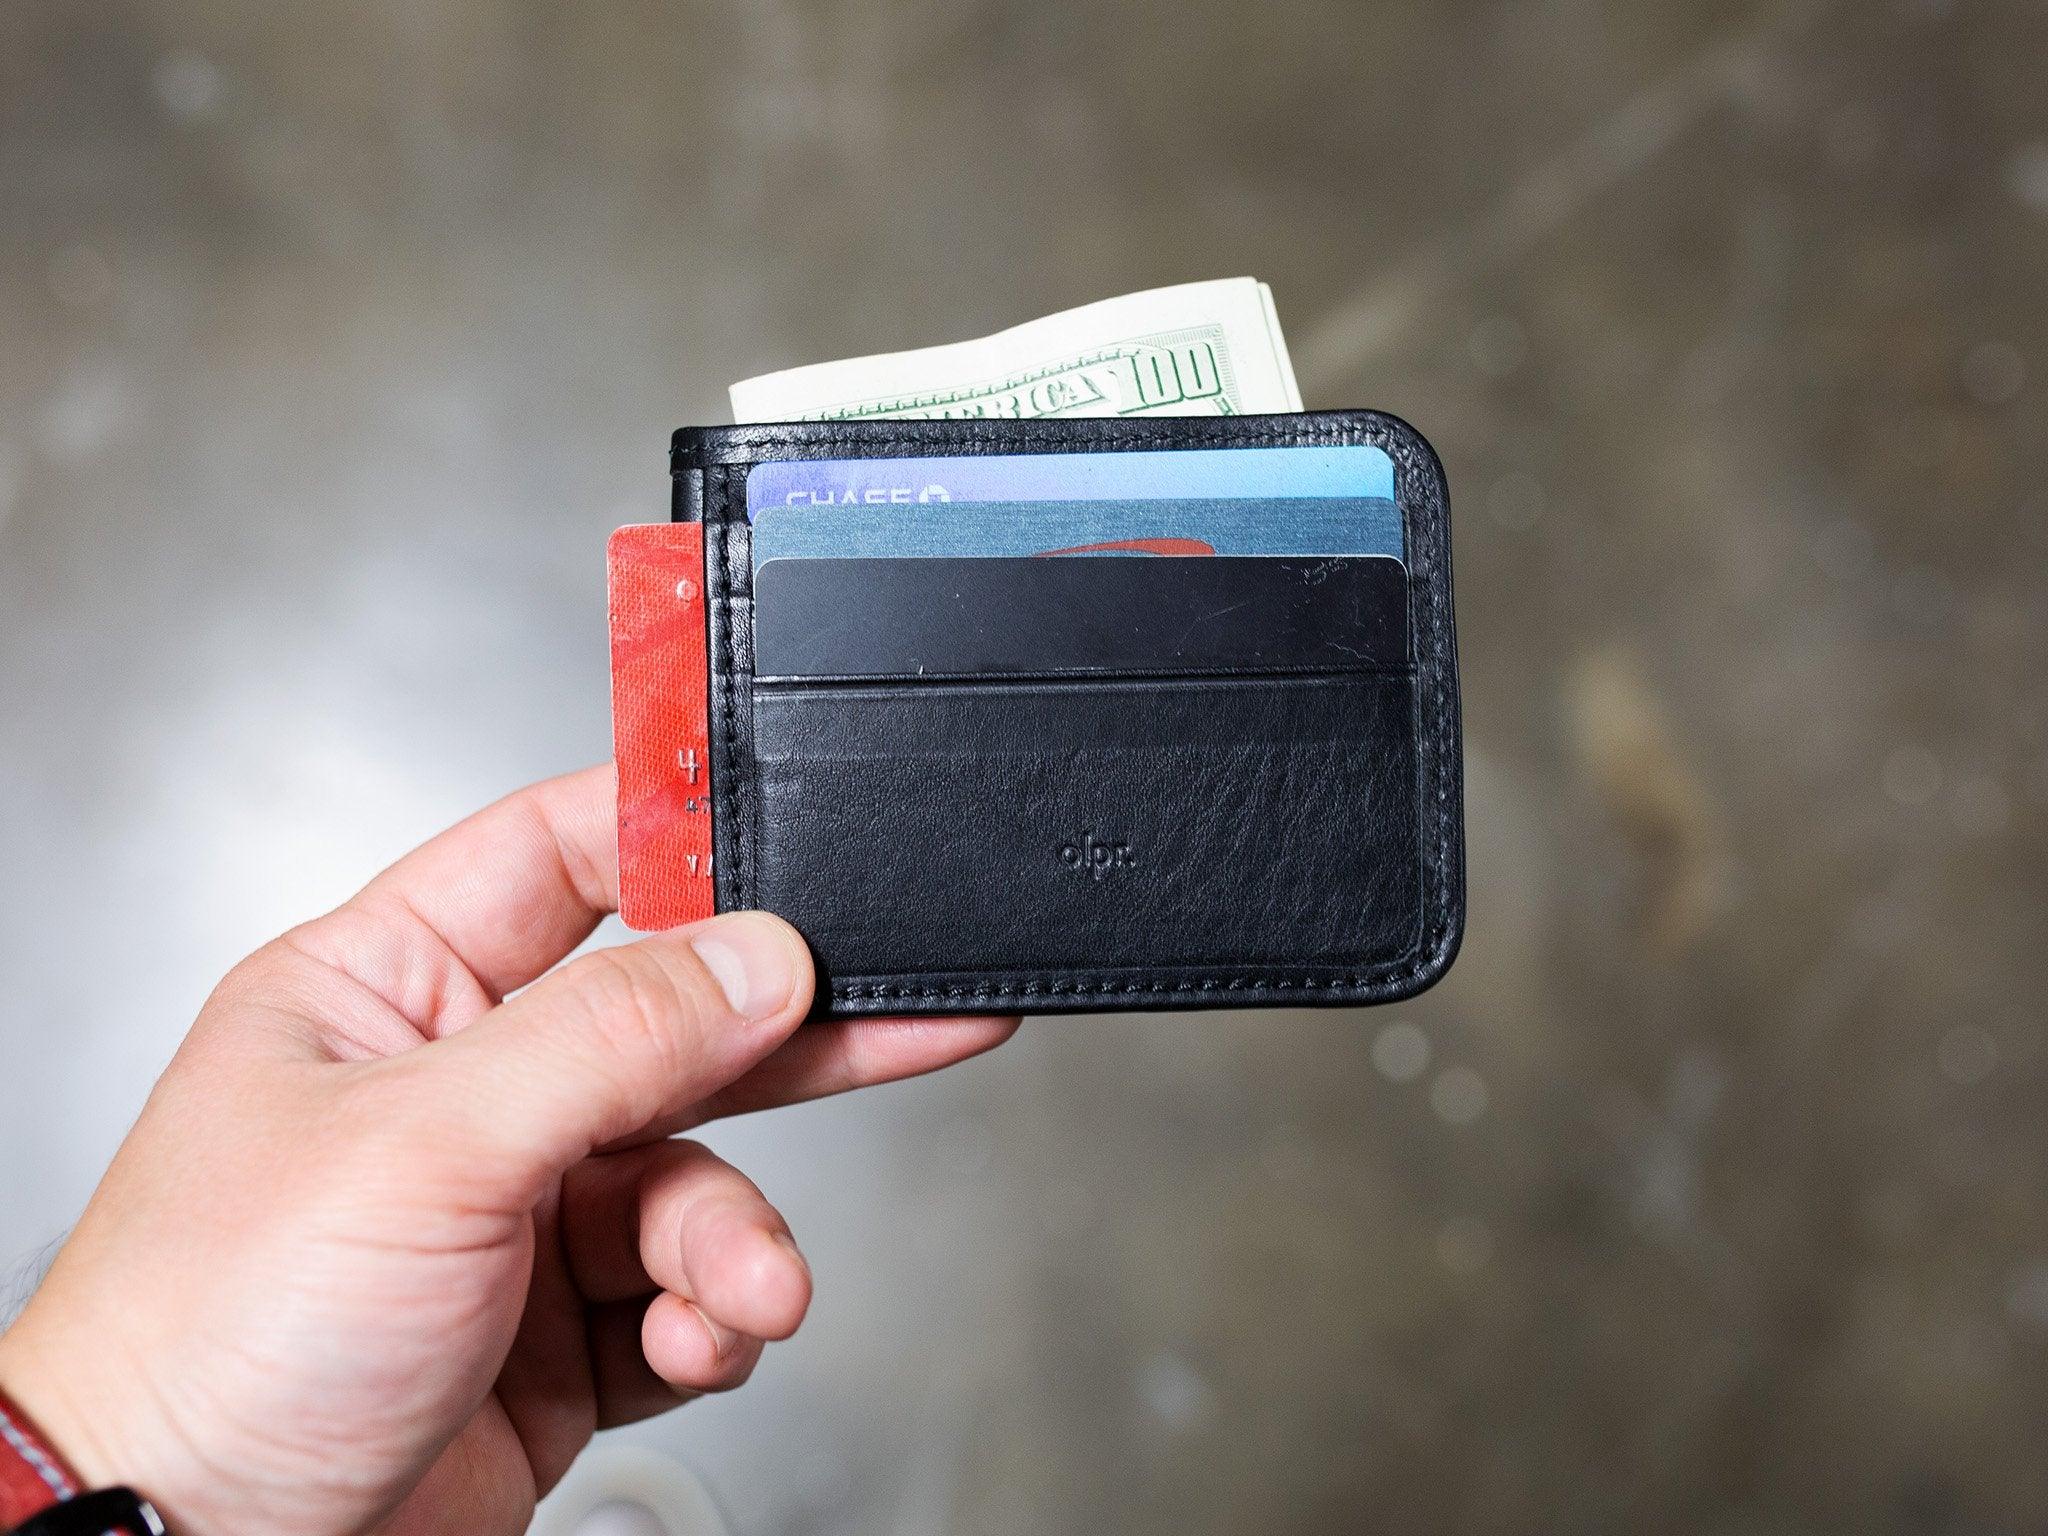 Zoé leather wallet